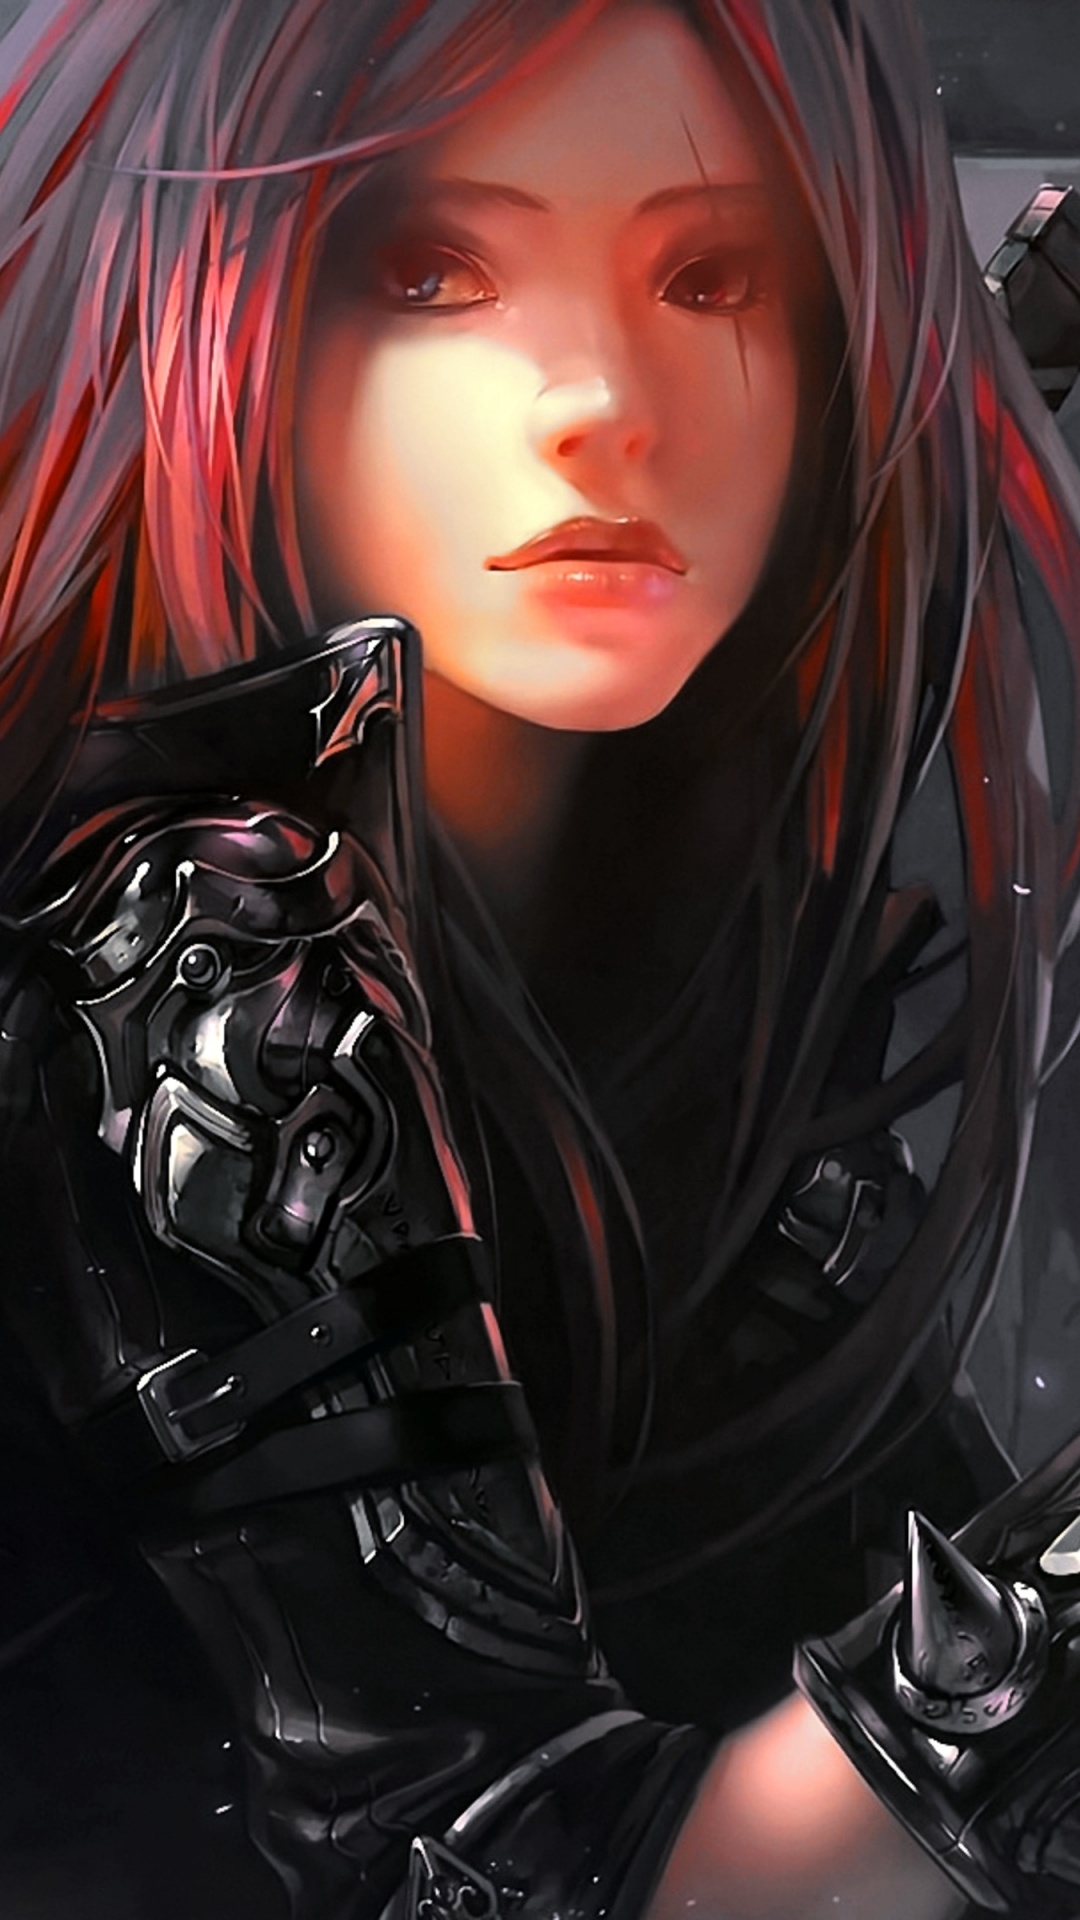 Woman With Red Hair Wearing Black Leather Jacket. Wallpaper in 1080x1920 Resolution